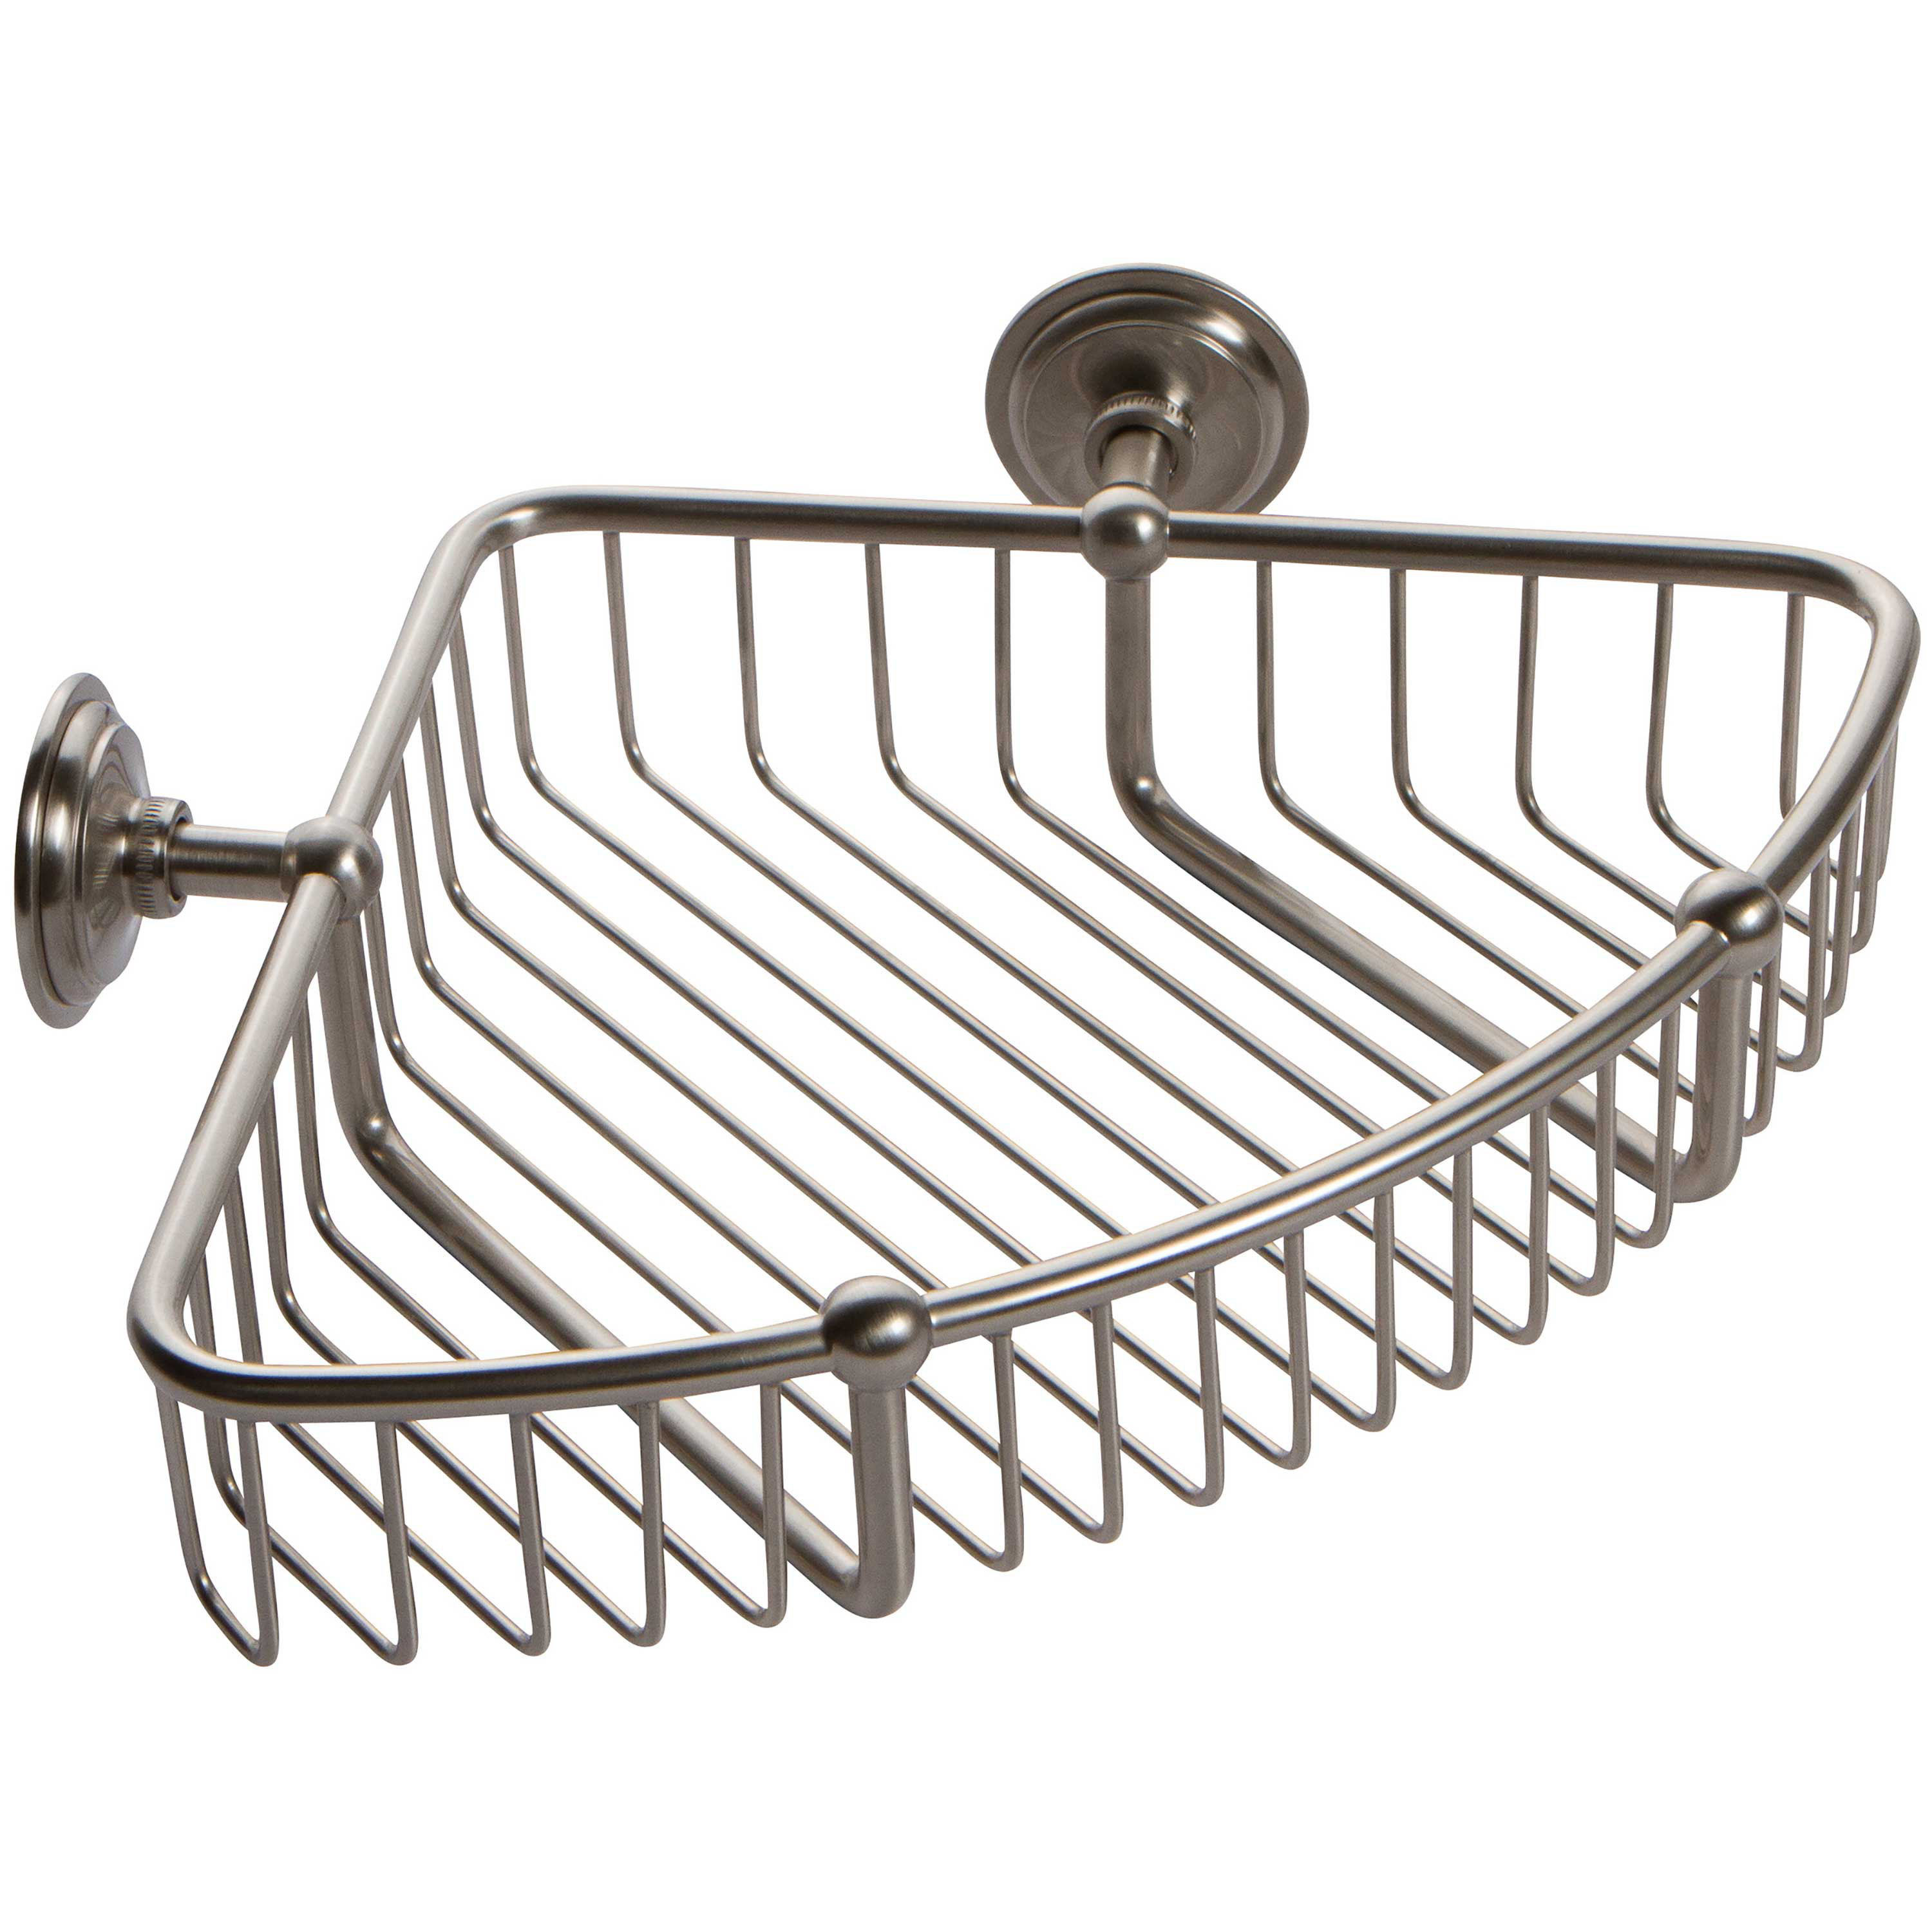 HASKO accessories - Corner Shower Caddy with Suction Cup - Stainless Steel  Basket for Bathroom Storage (Chrome)